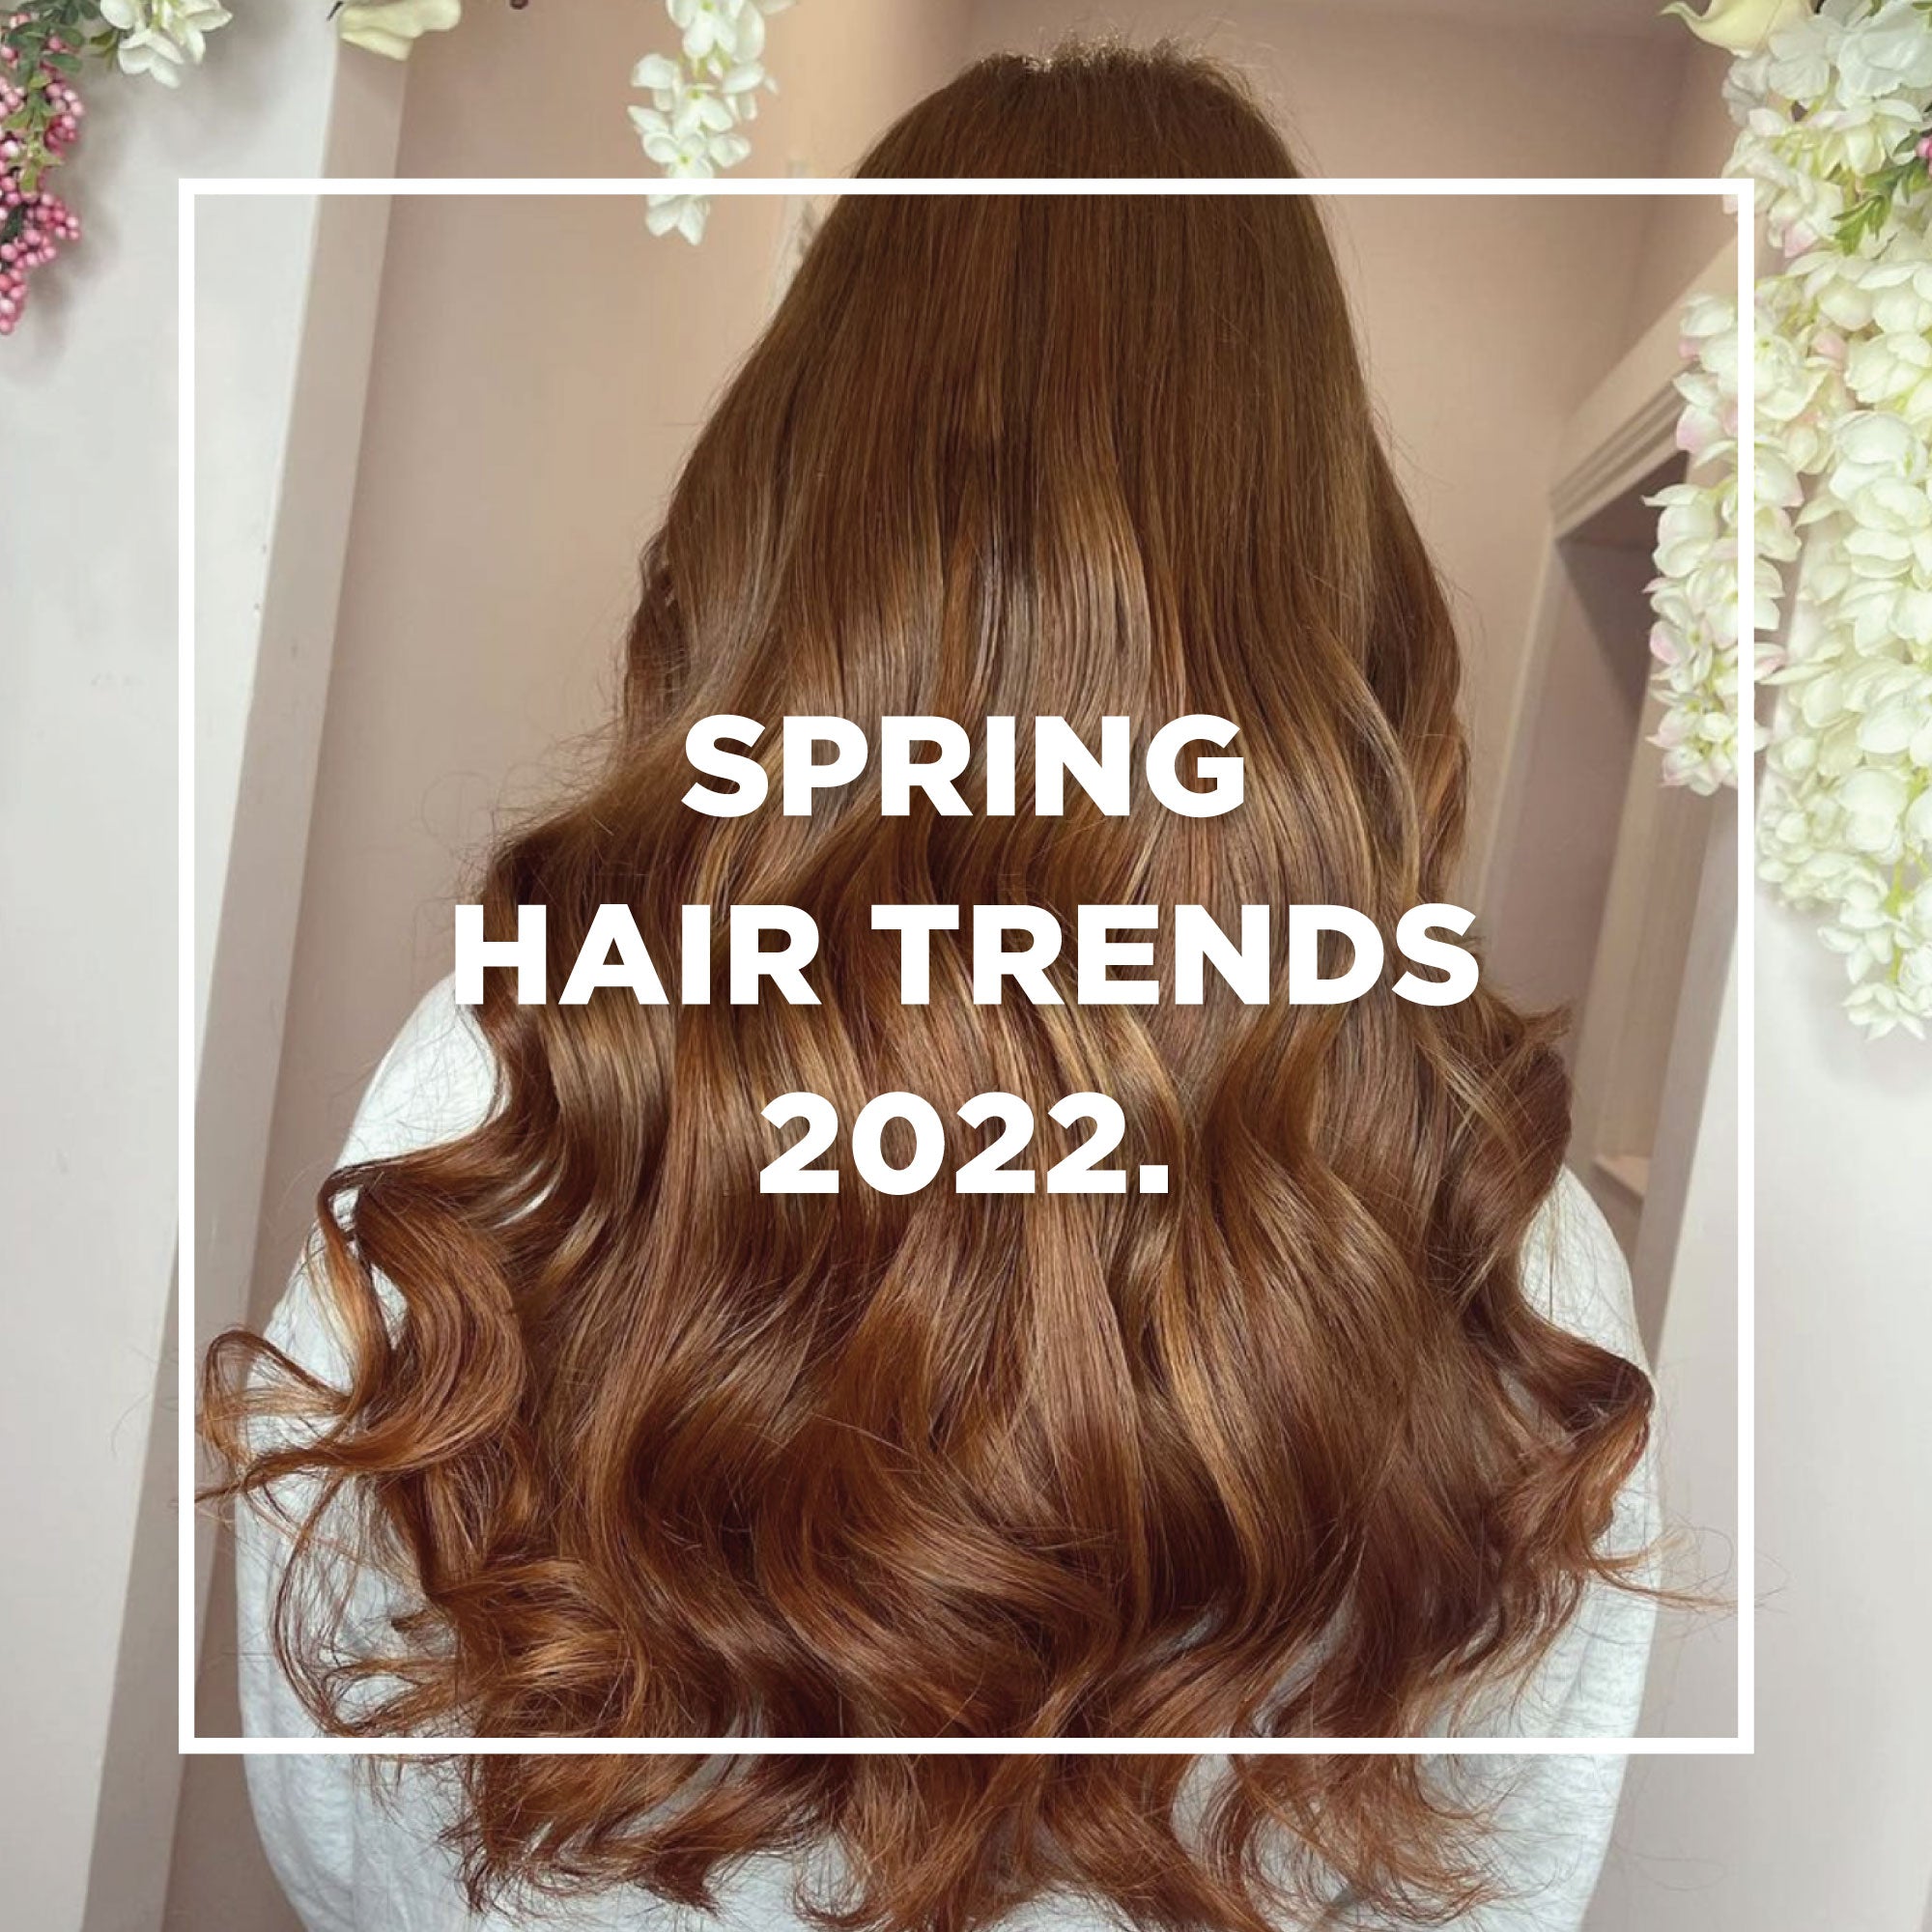 5 Hair Trends We Expect To See In Spring